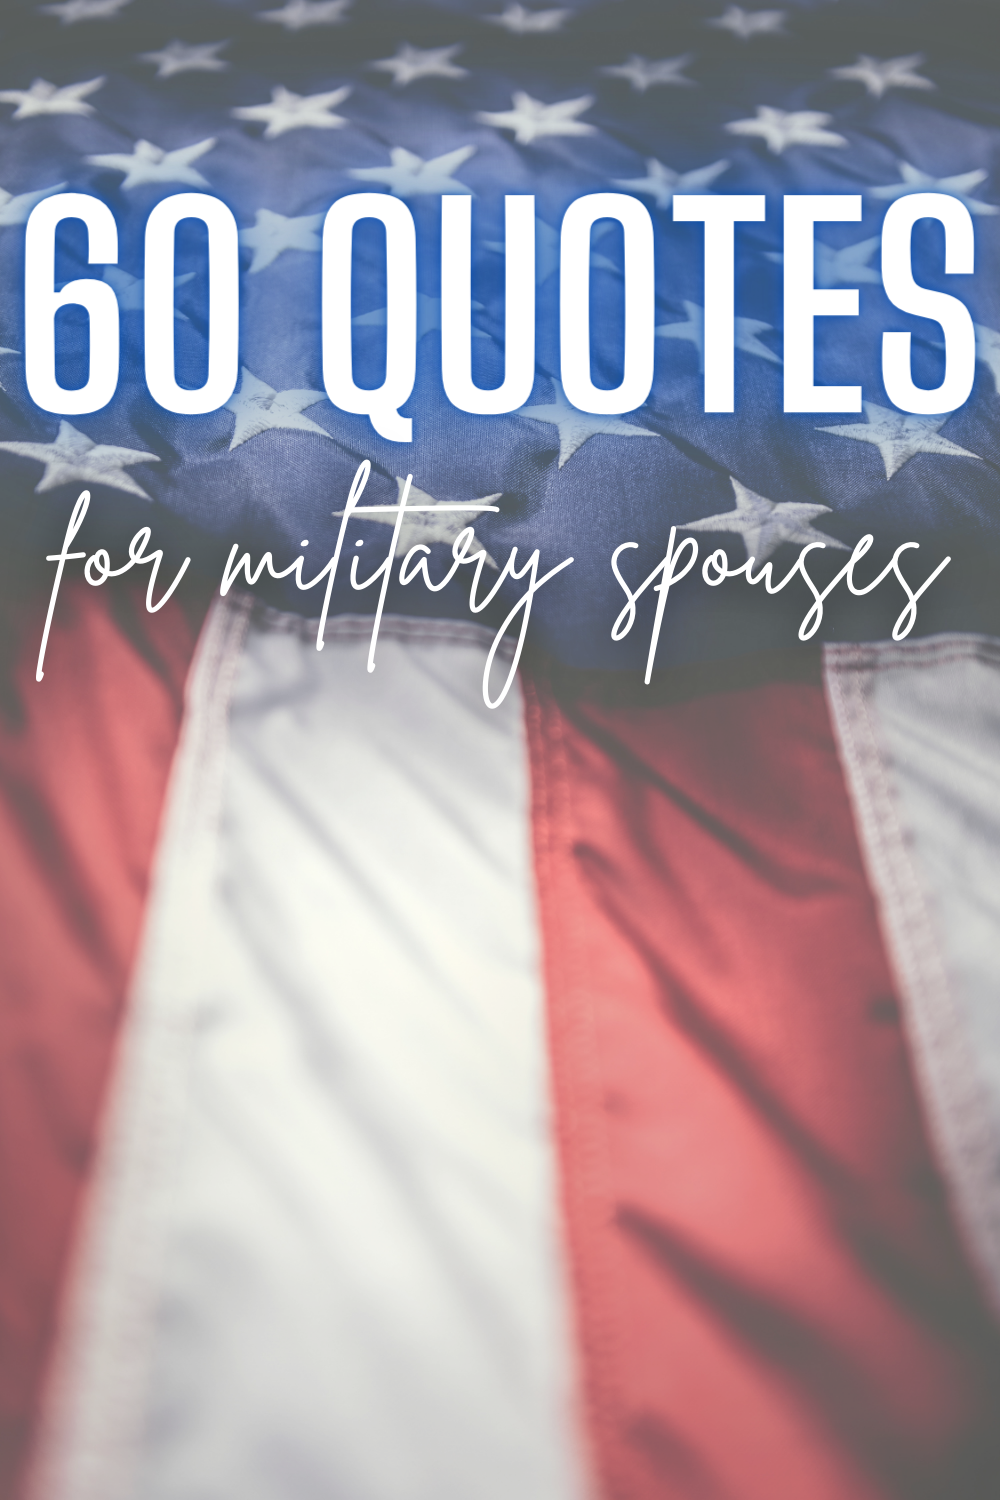 MILITARY SPOUSE QUOTES